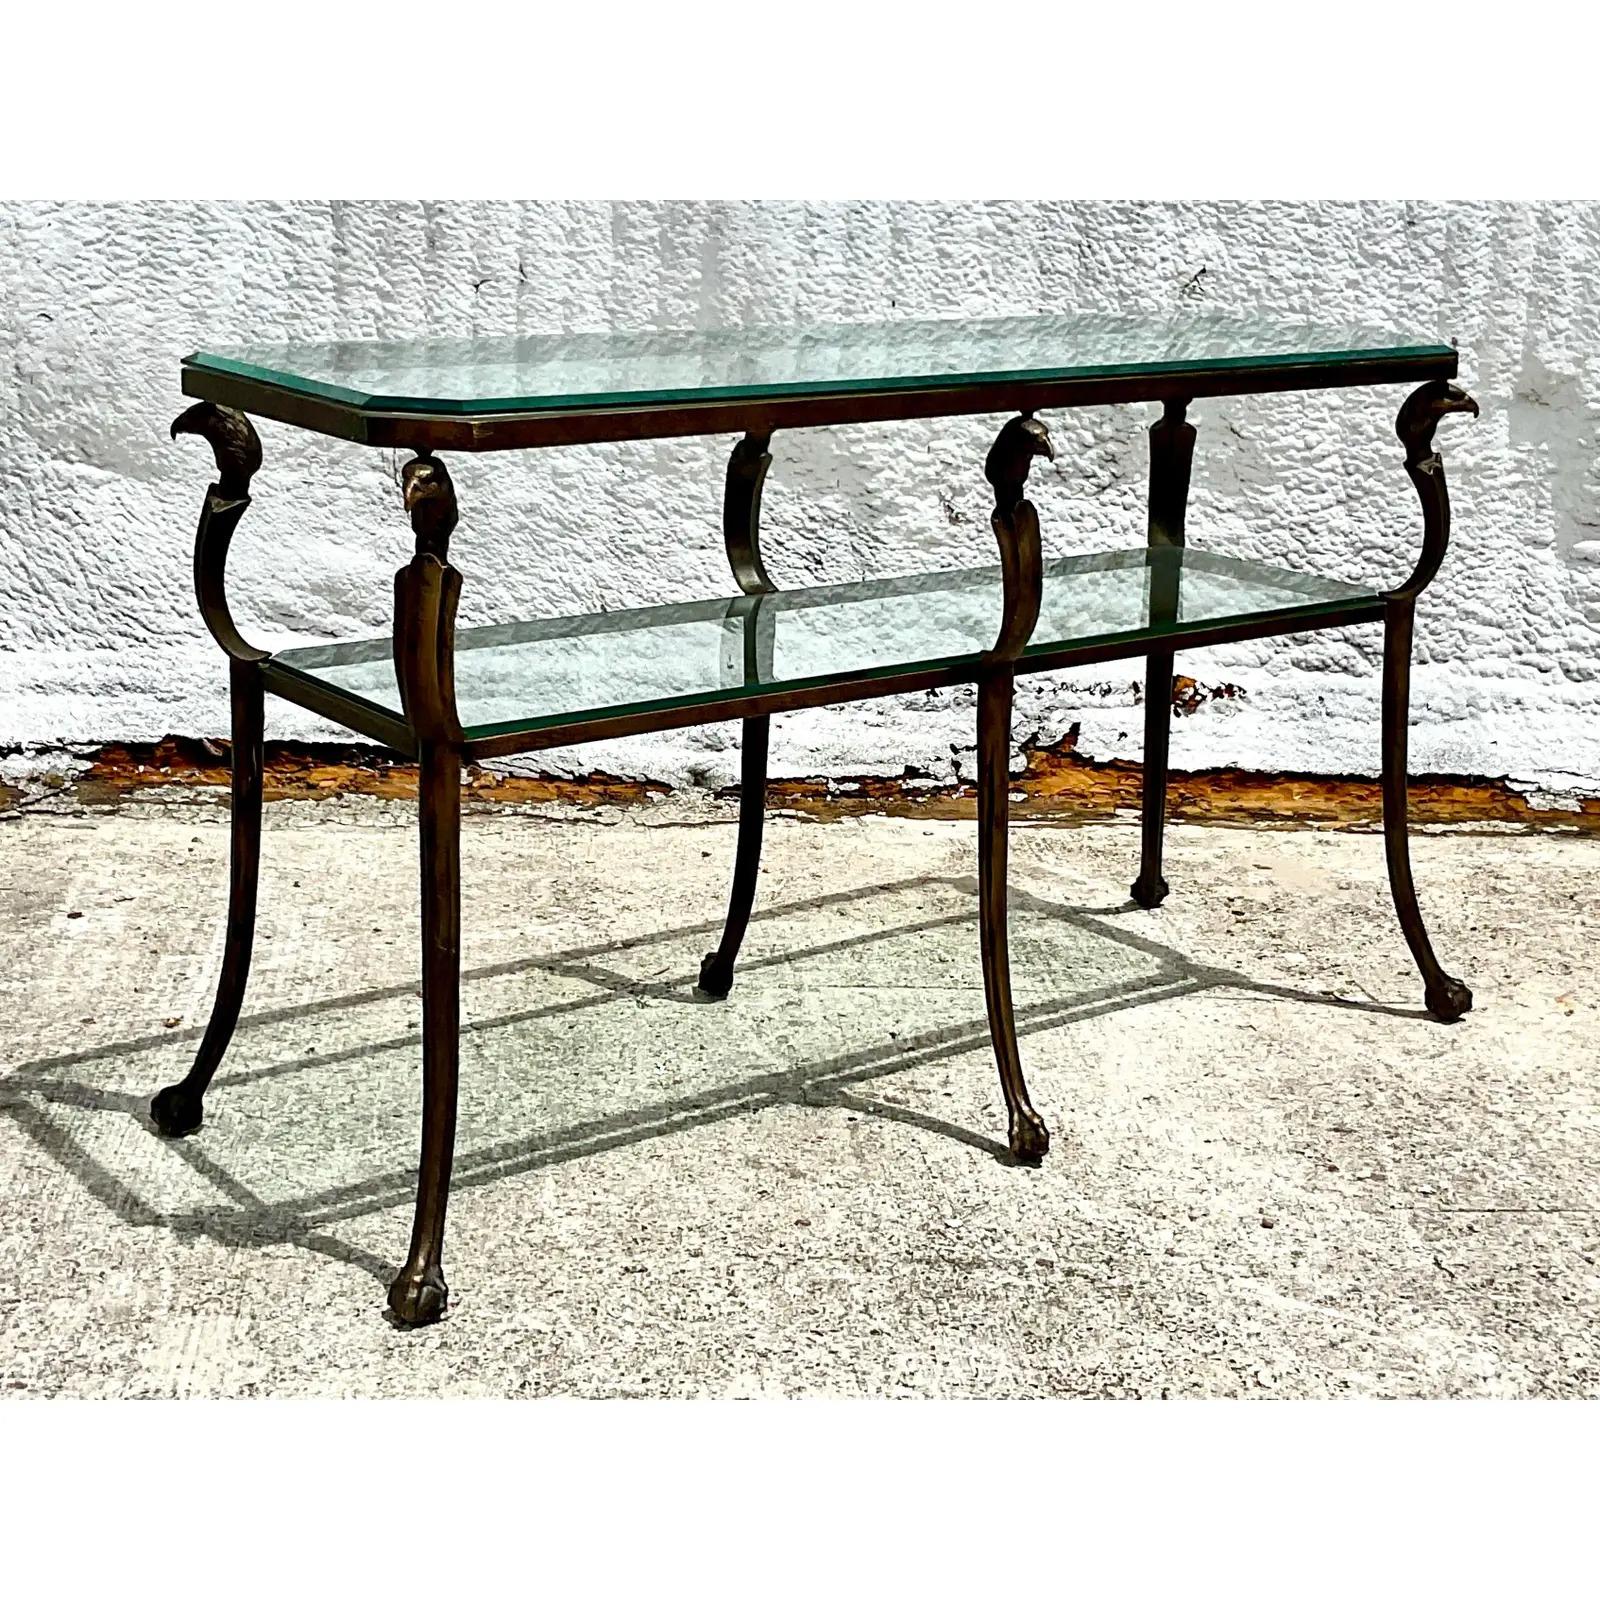 Vintage Regency gilt over metal console table. A chic bi-level rectangle shape with striking bird head design at each corner. Inset glass panels. Acquired from a Palm Beach estate.